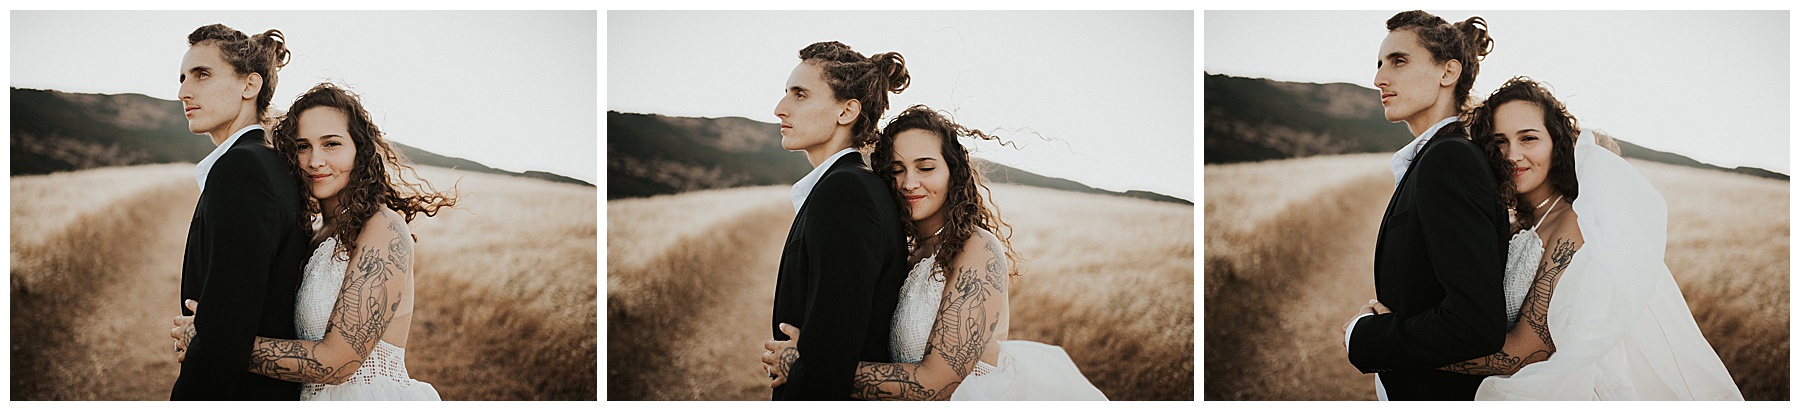 Giselle and Andre’s sunset bohemian California elopement - Photographed by Juju Photography - California and destination wedding photographer